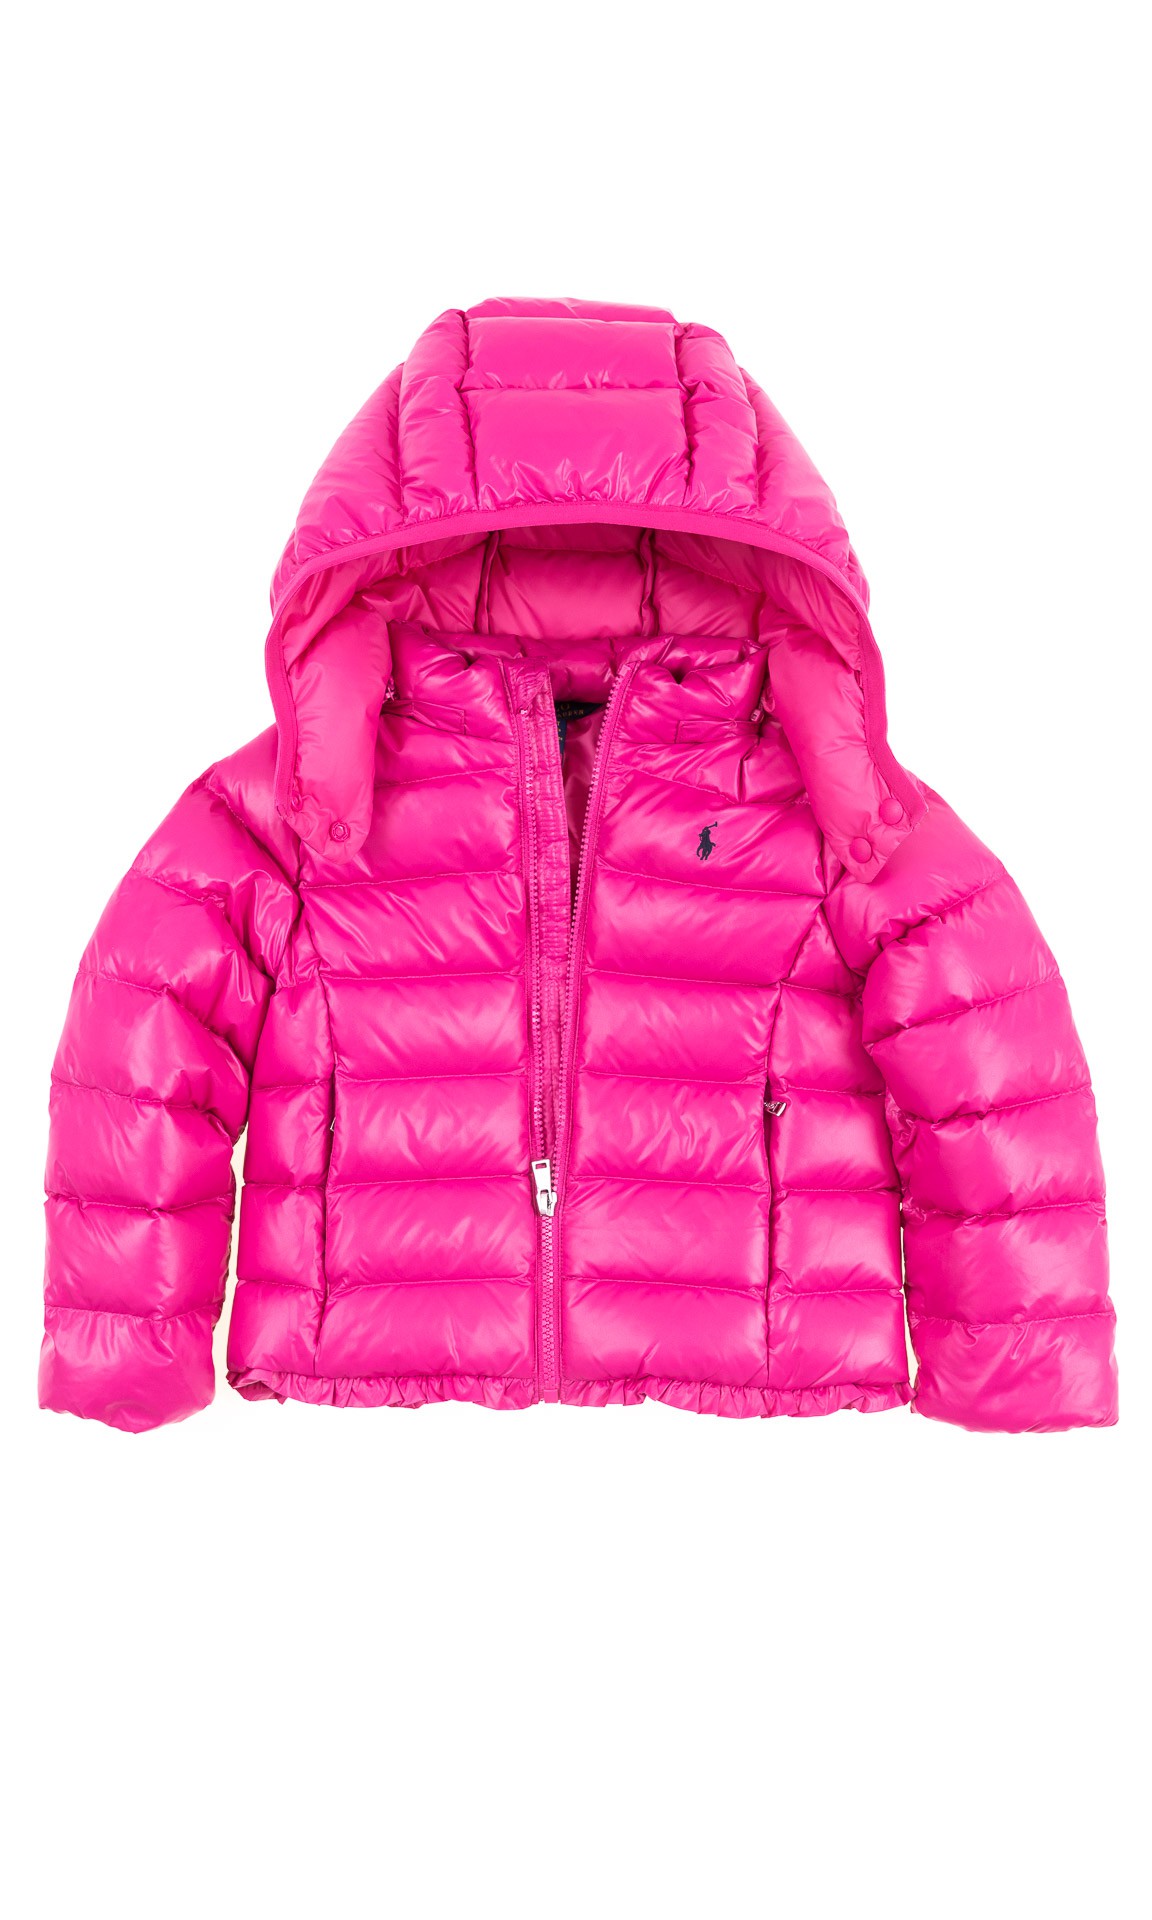 Pink down jacket for girls, Polo Ralph Lauren - Celebrity-Club